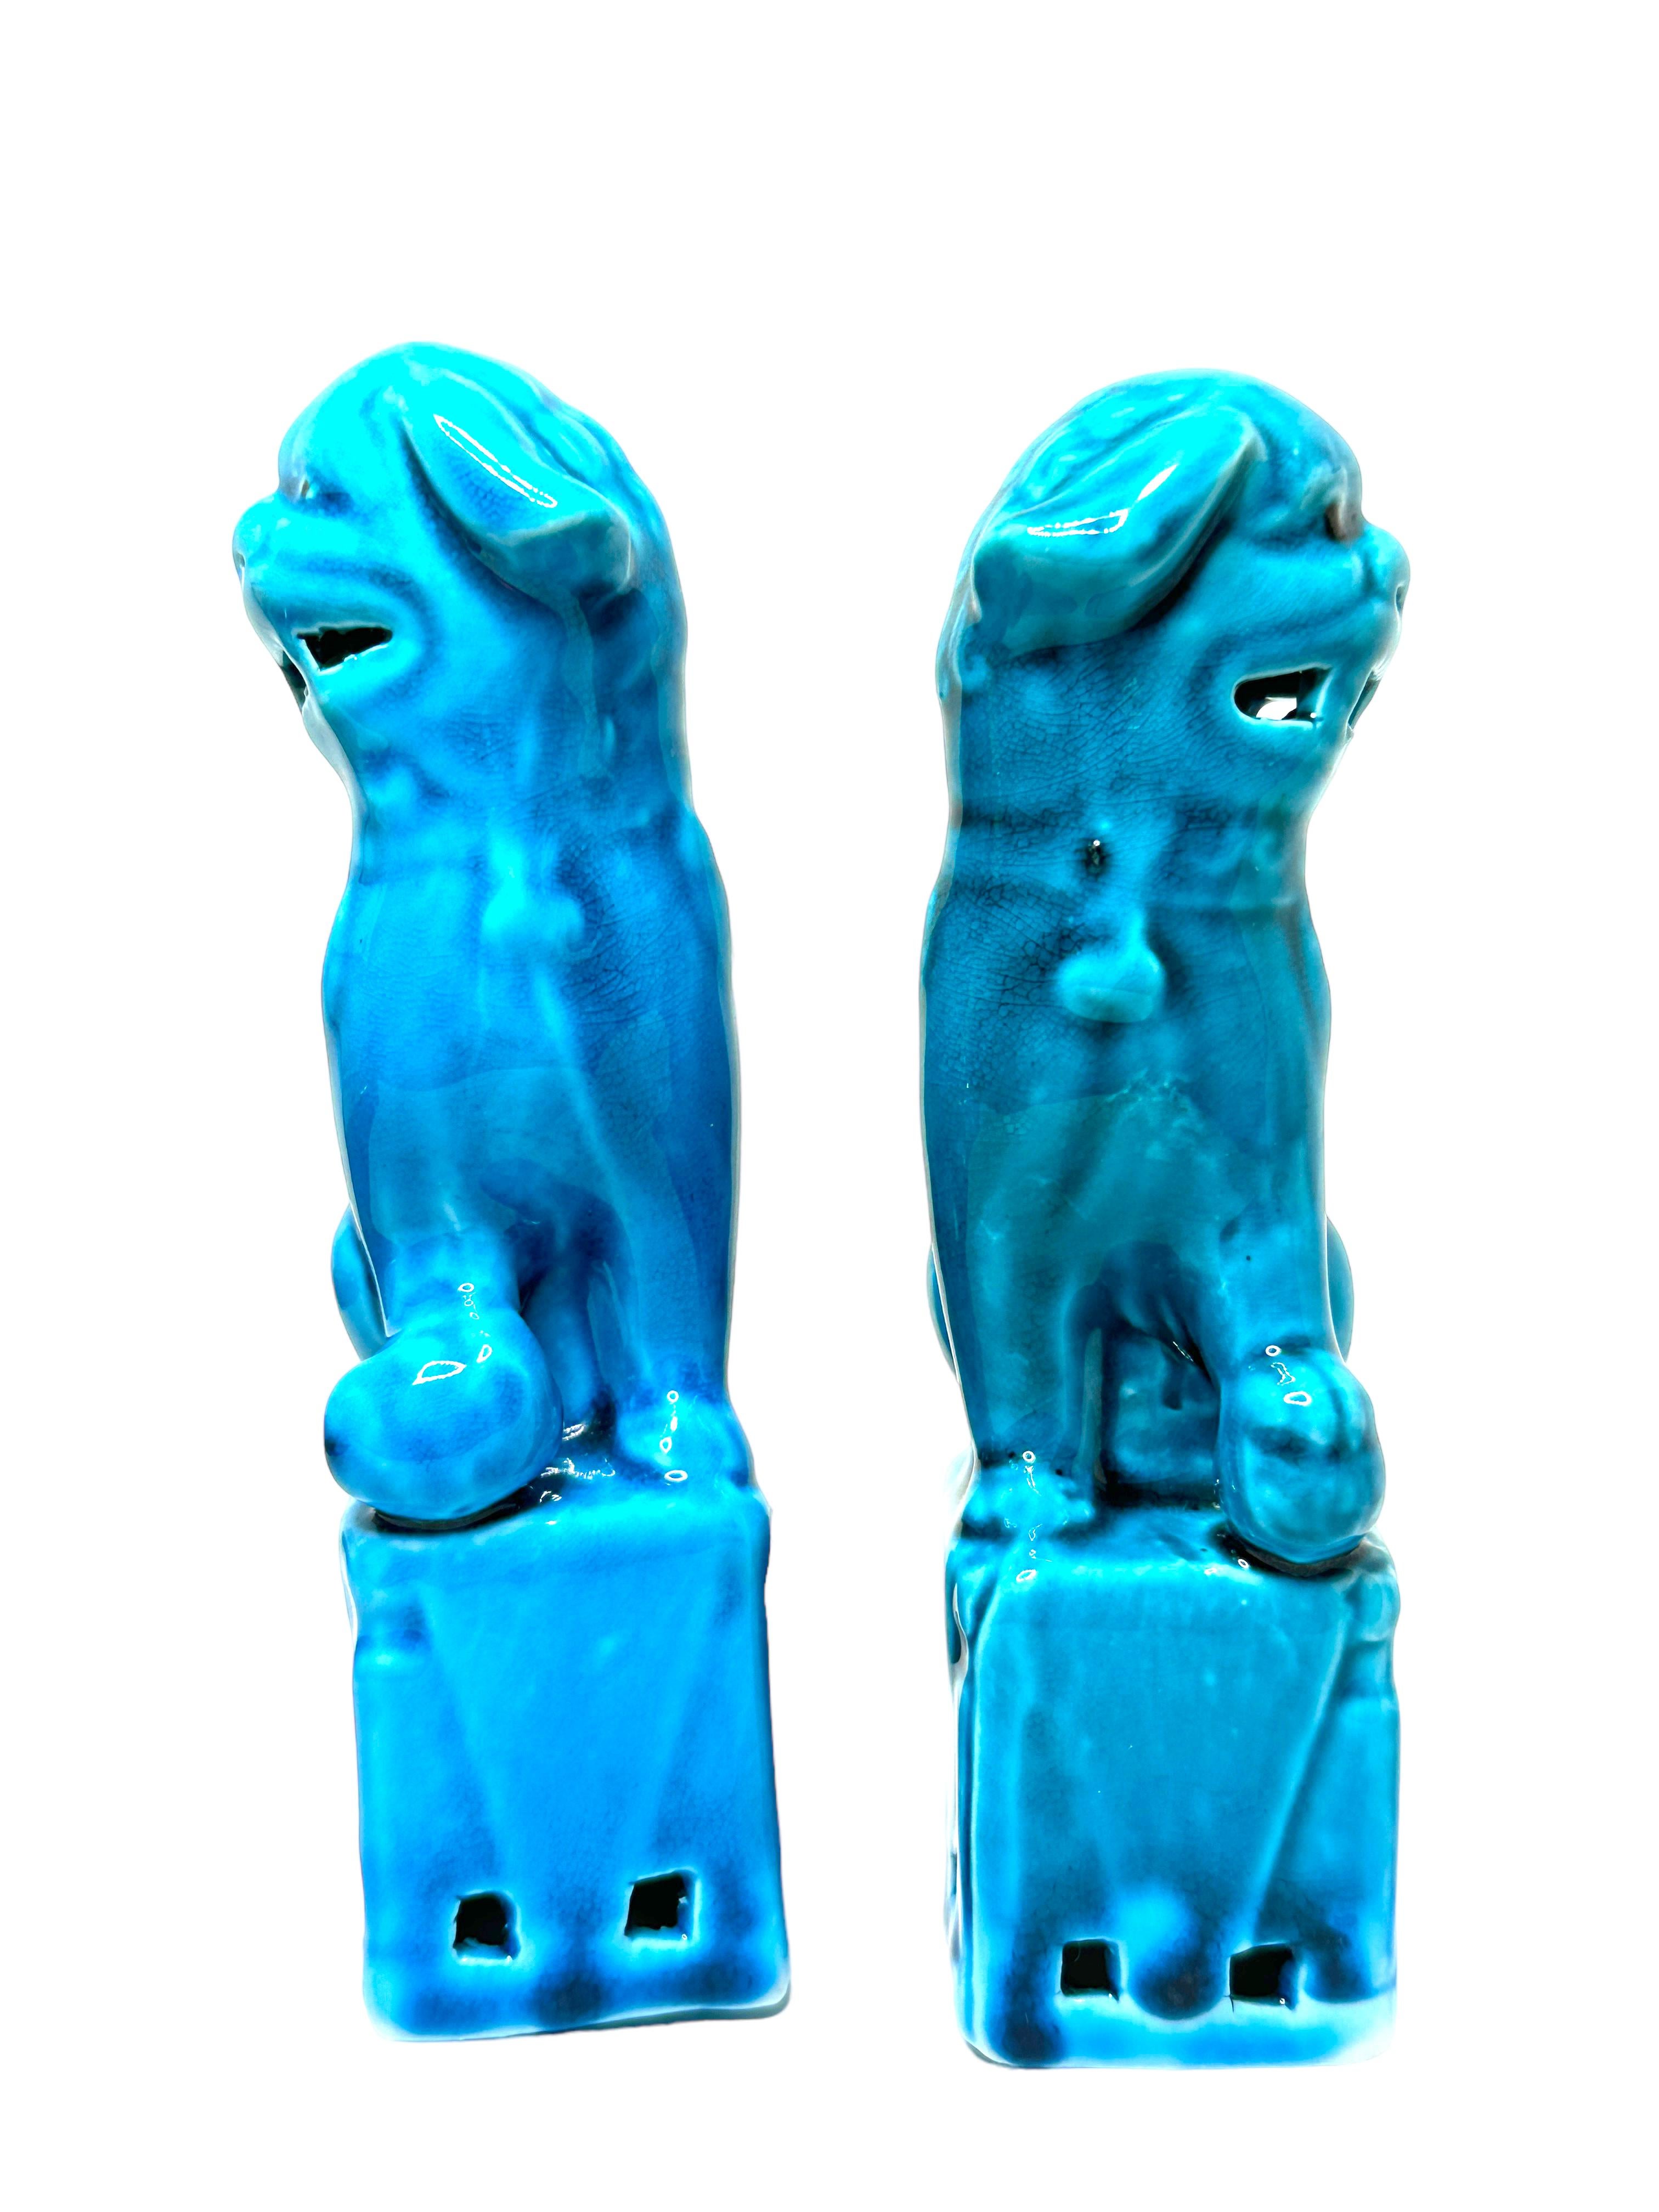 A very nice pair of vintage, turquoise blue, ceramic foo dogs, circa 1980s. Excellent condition and patina; makes a fun decor item in any room!